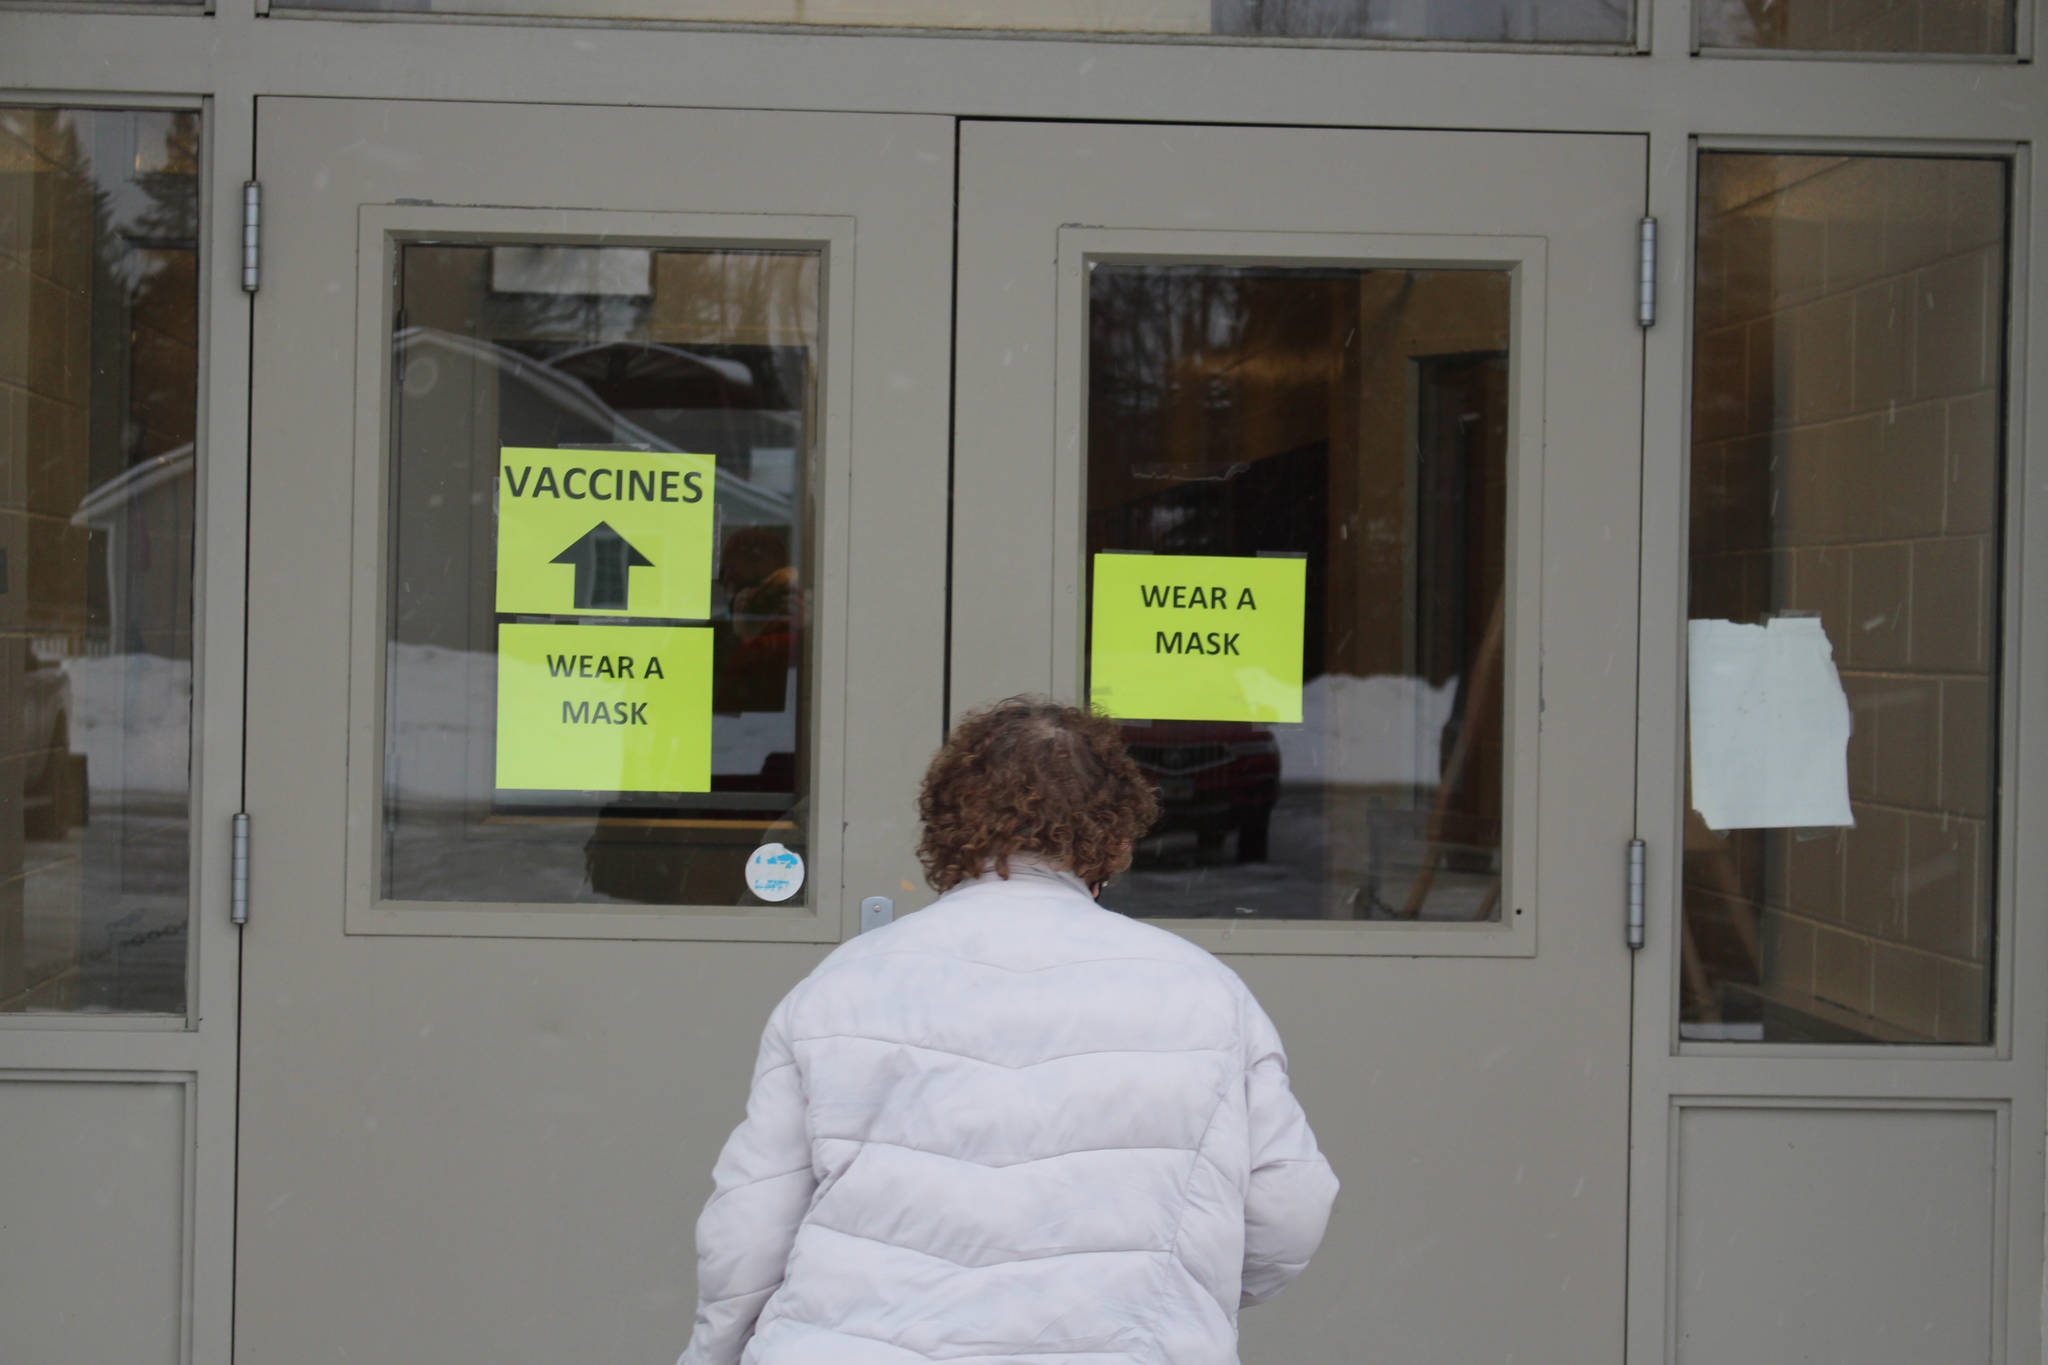 A Kenai Peninsula Resident walks in to the Soldotna Prep School for her vaccine appointment during a clinic hosted by the Kenai Peninsula Borough and Soldotna Professional Pharmacy in Soldotna, Alaska on Jan. 23, 2021. (Photo by Brian Mazurek/Peninsula Clarion)